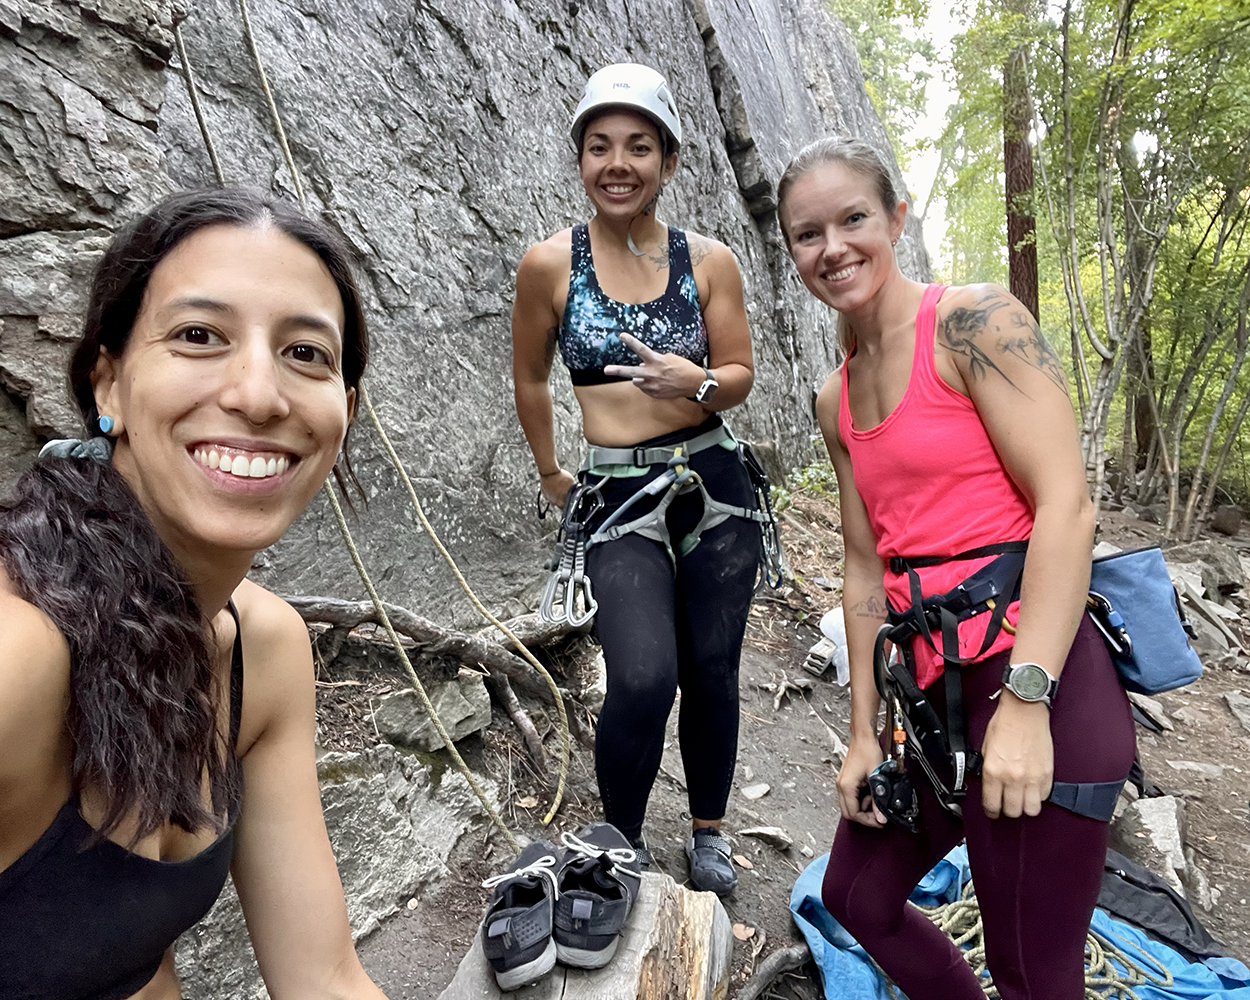  Sam, me, and Natalie having a blast at Another Buttress.  